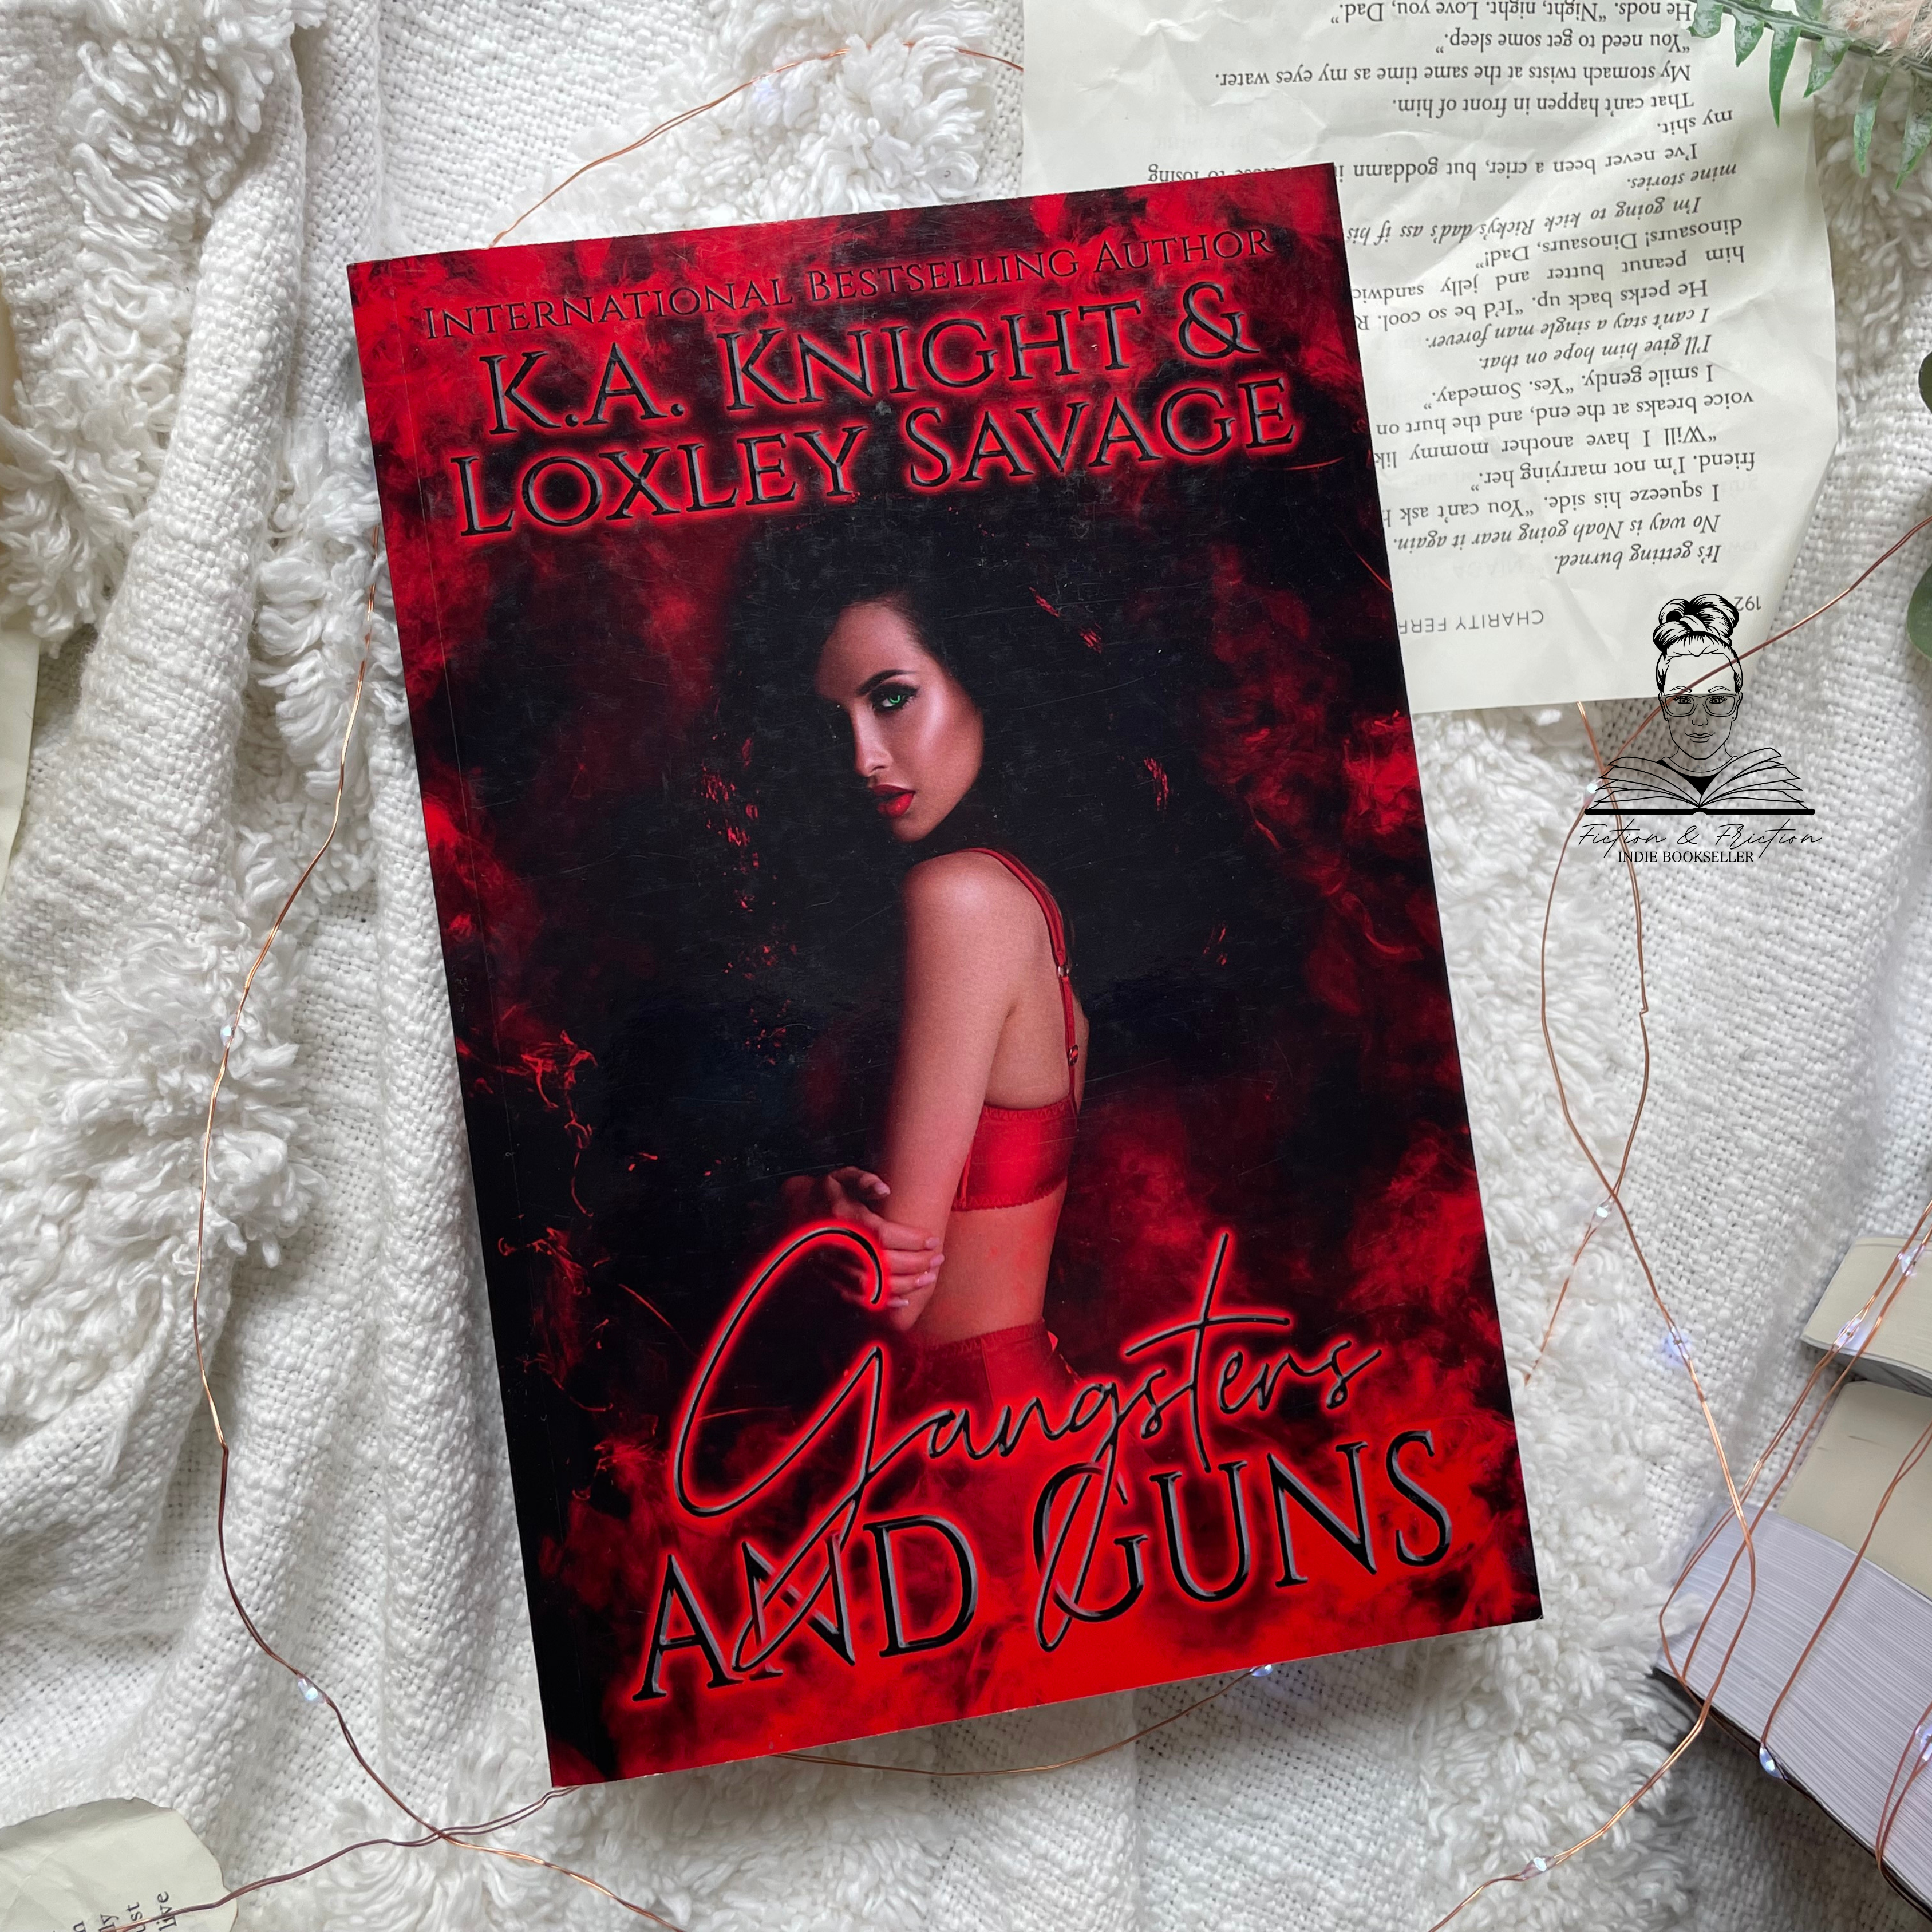 Gangsters and Guns by K.A. Knight